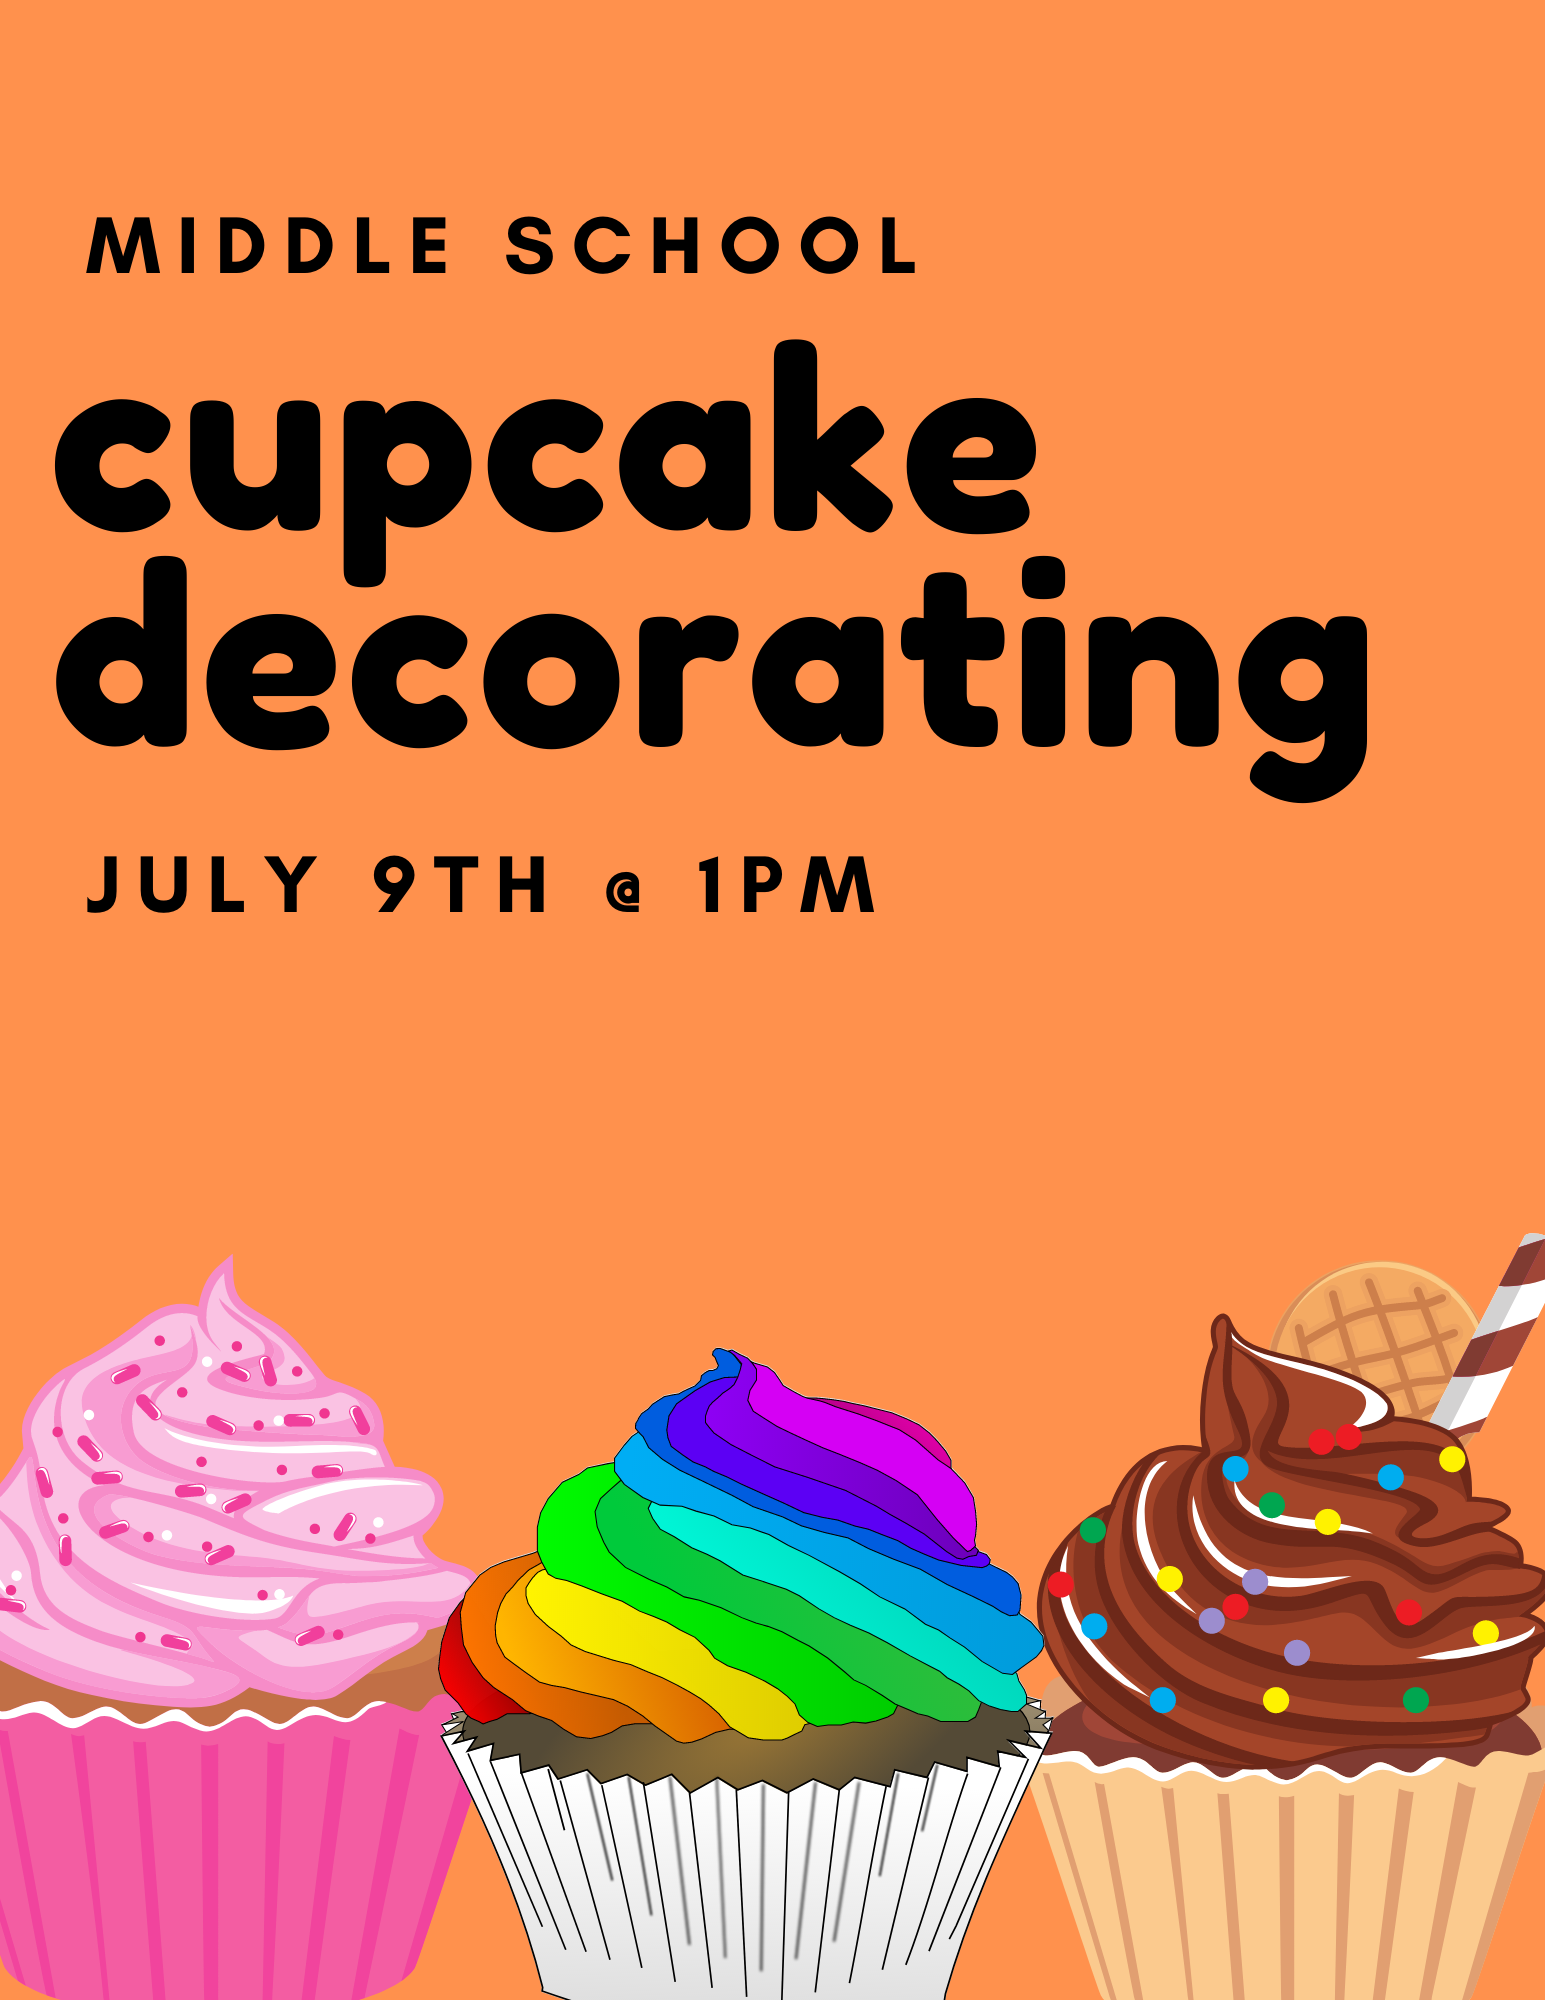 Middle School Cupcake Decorating July 9th @ 1 PM poster